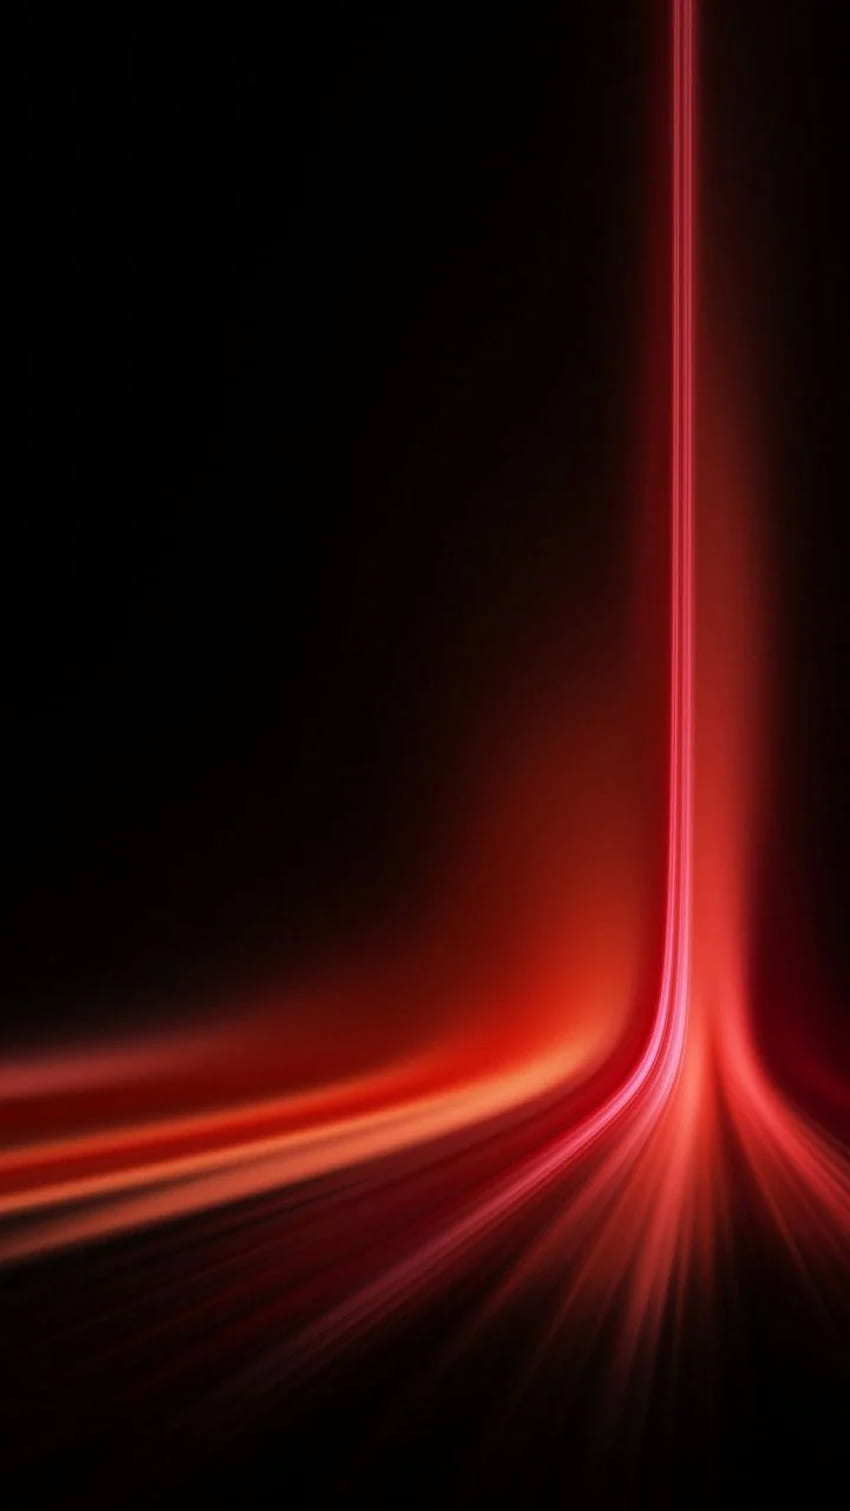 Red Lines Sony Xperia - For Sony Mobile, Sony Xperia HD phone wallpaper